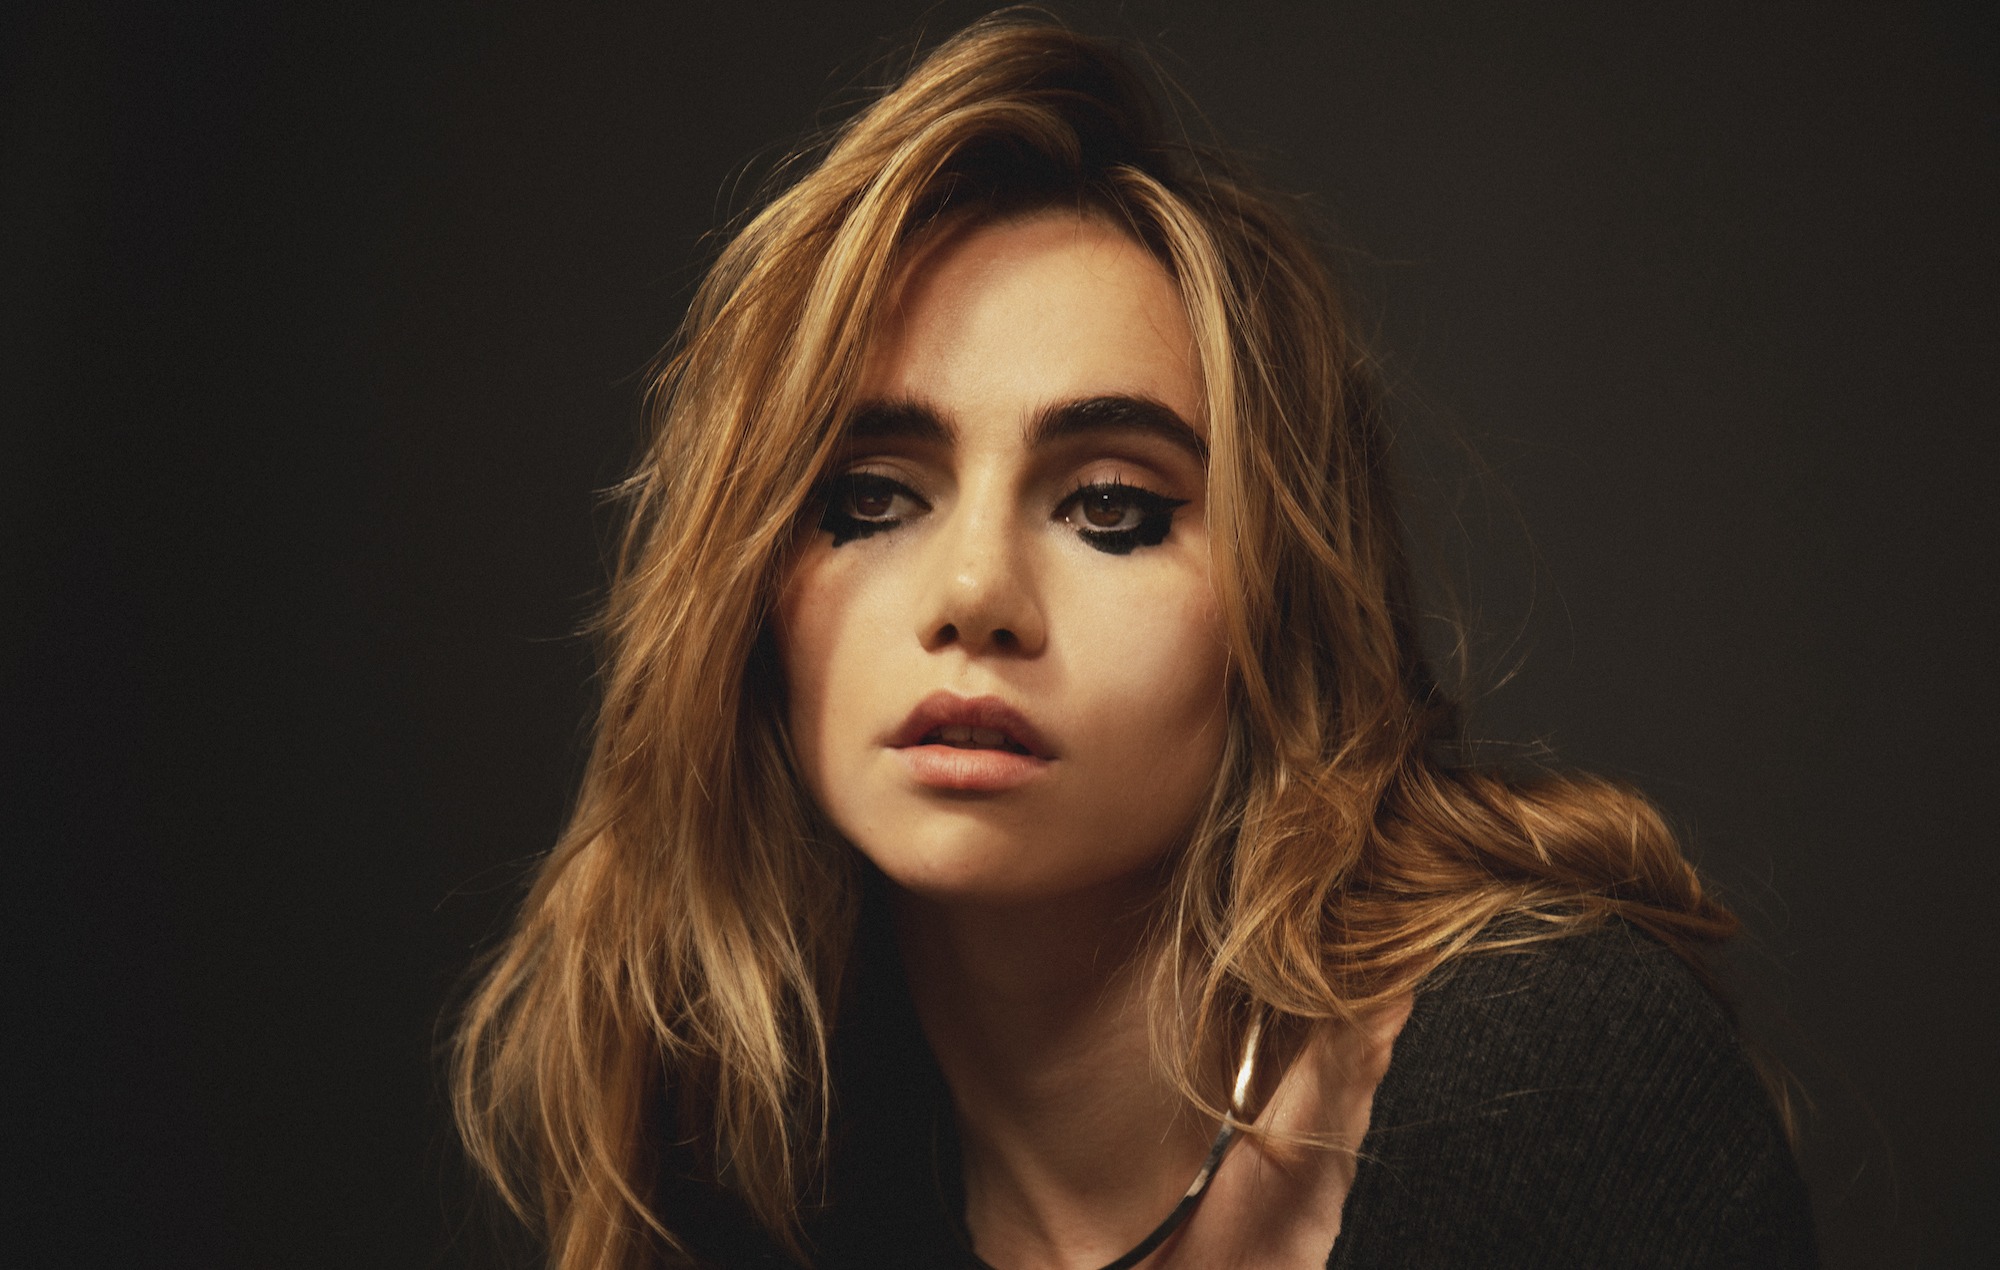 Suki Waterhouse signs to Sub Pop and tells us about her ‘Thelma & Louise’-inspired new song ‘Moves’